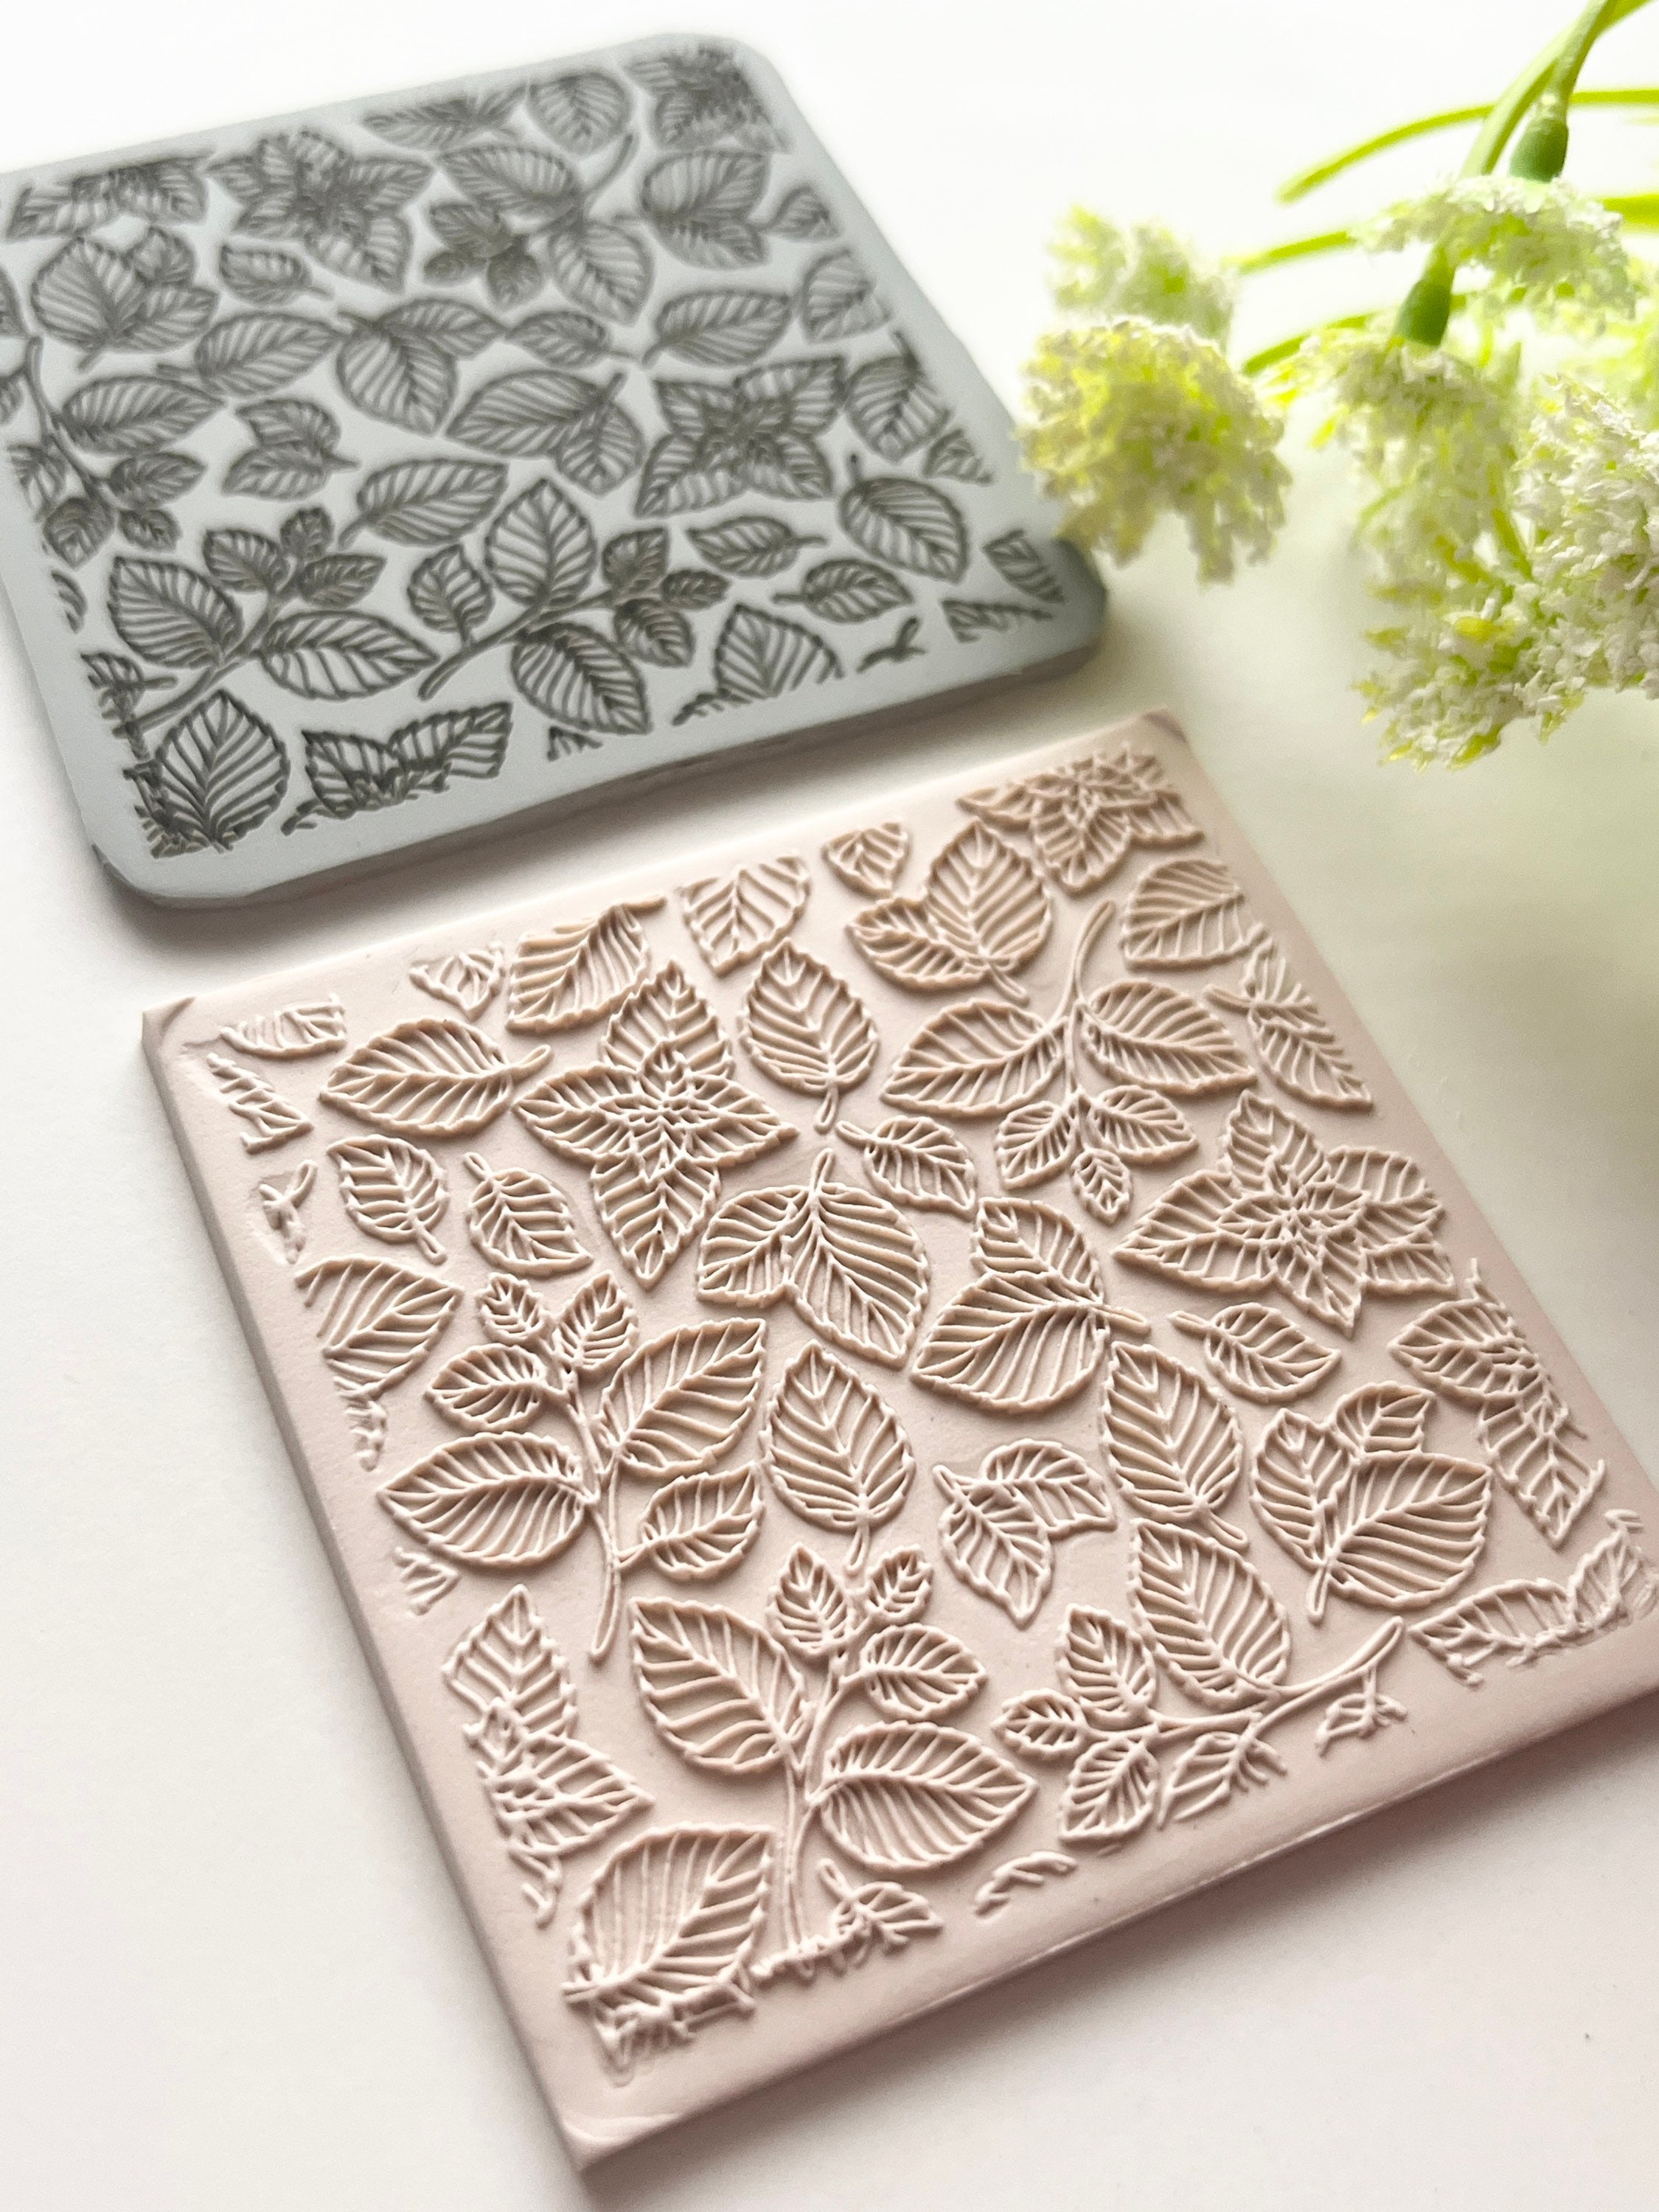 Simple Leaf Texture Clay Stamp for Botanical Patterns on Pottery, Small  Line Leaf Stamp for Natural Soaps, Clay Supplies for Ceramic Classes 